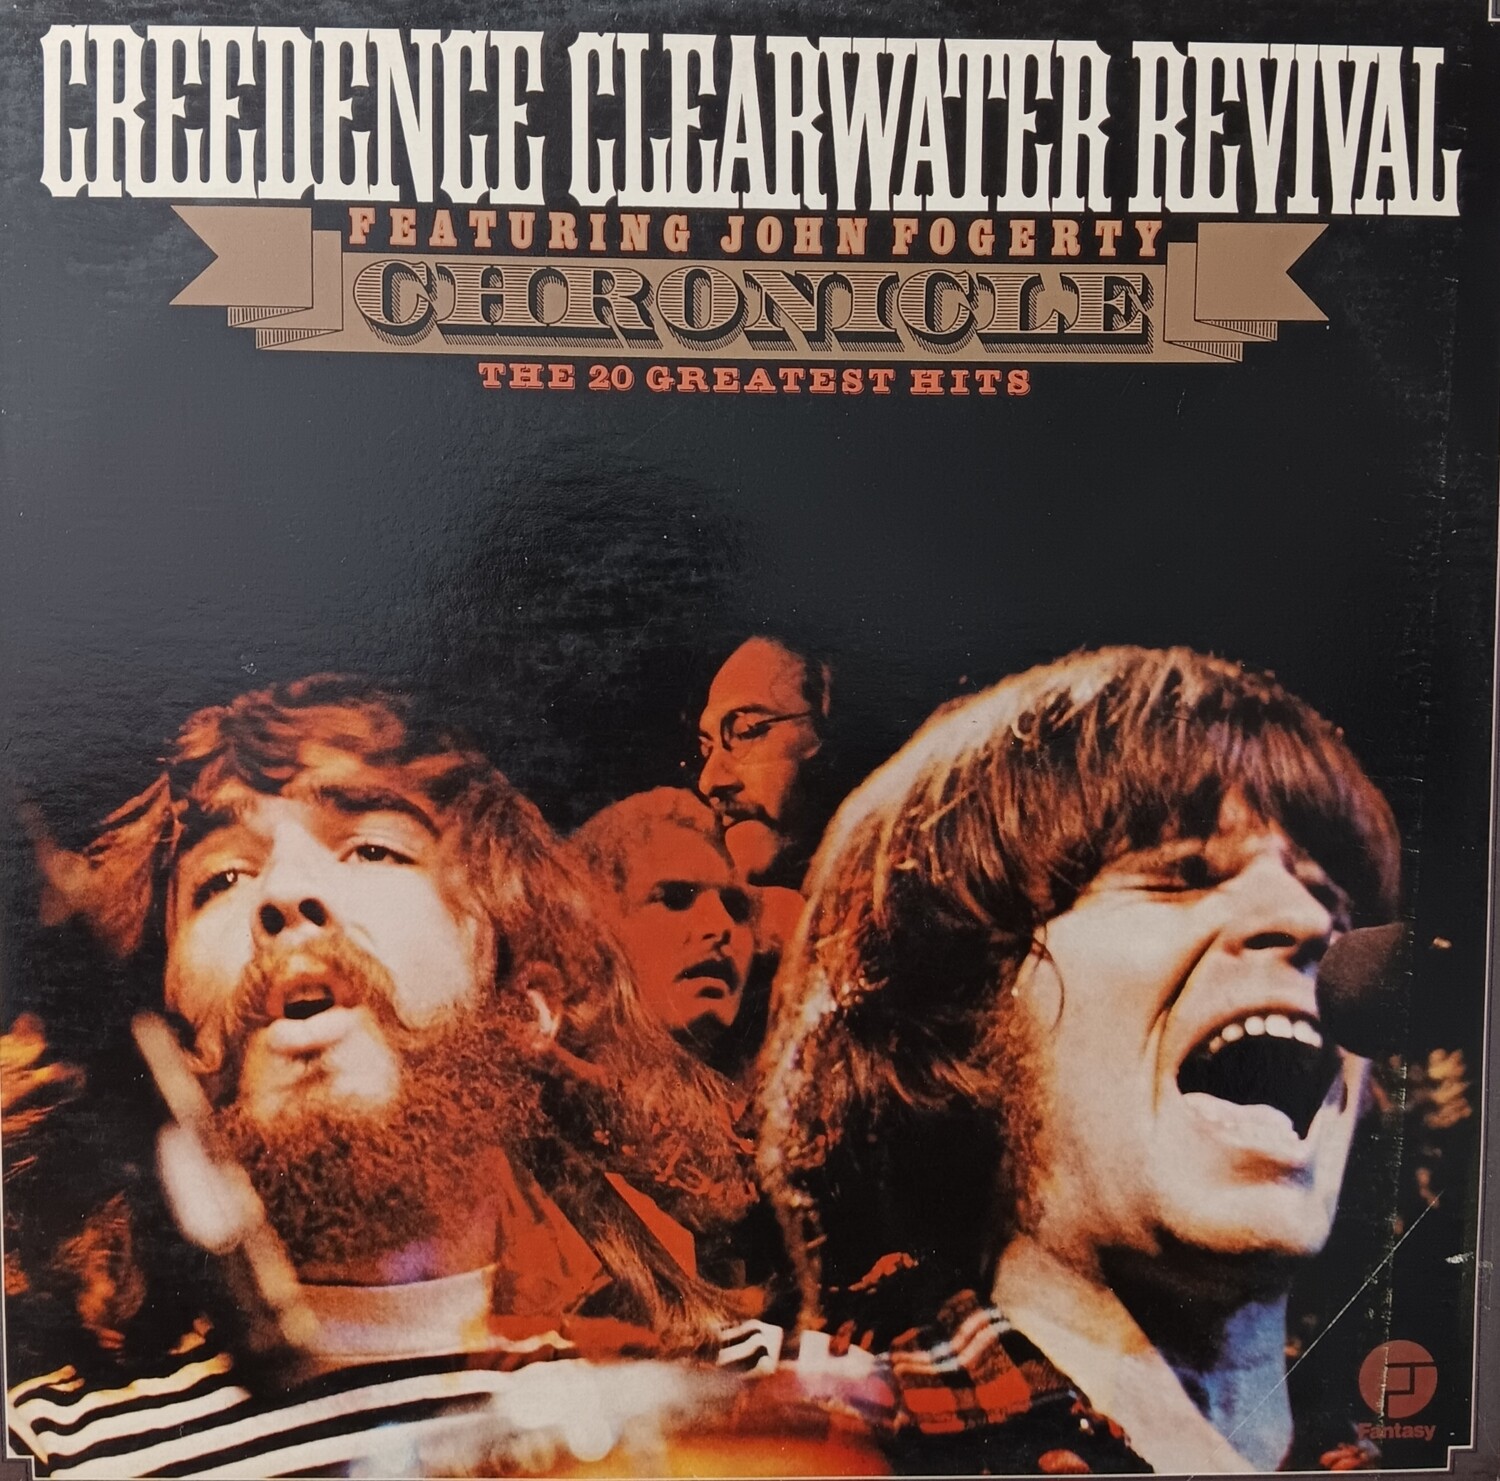 CREEDENCE CLEARWATER REVIVAL - Chronicles